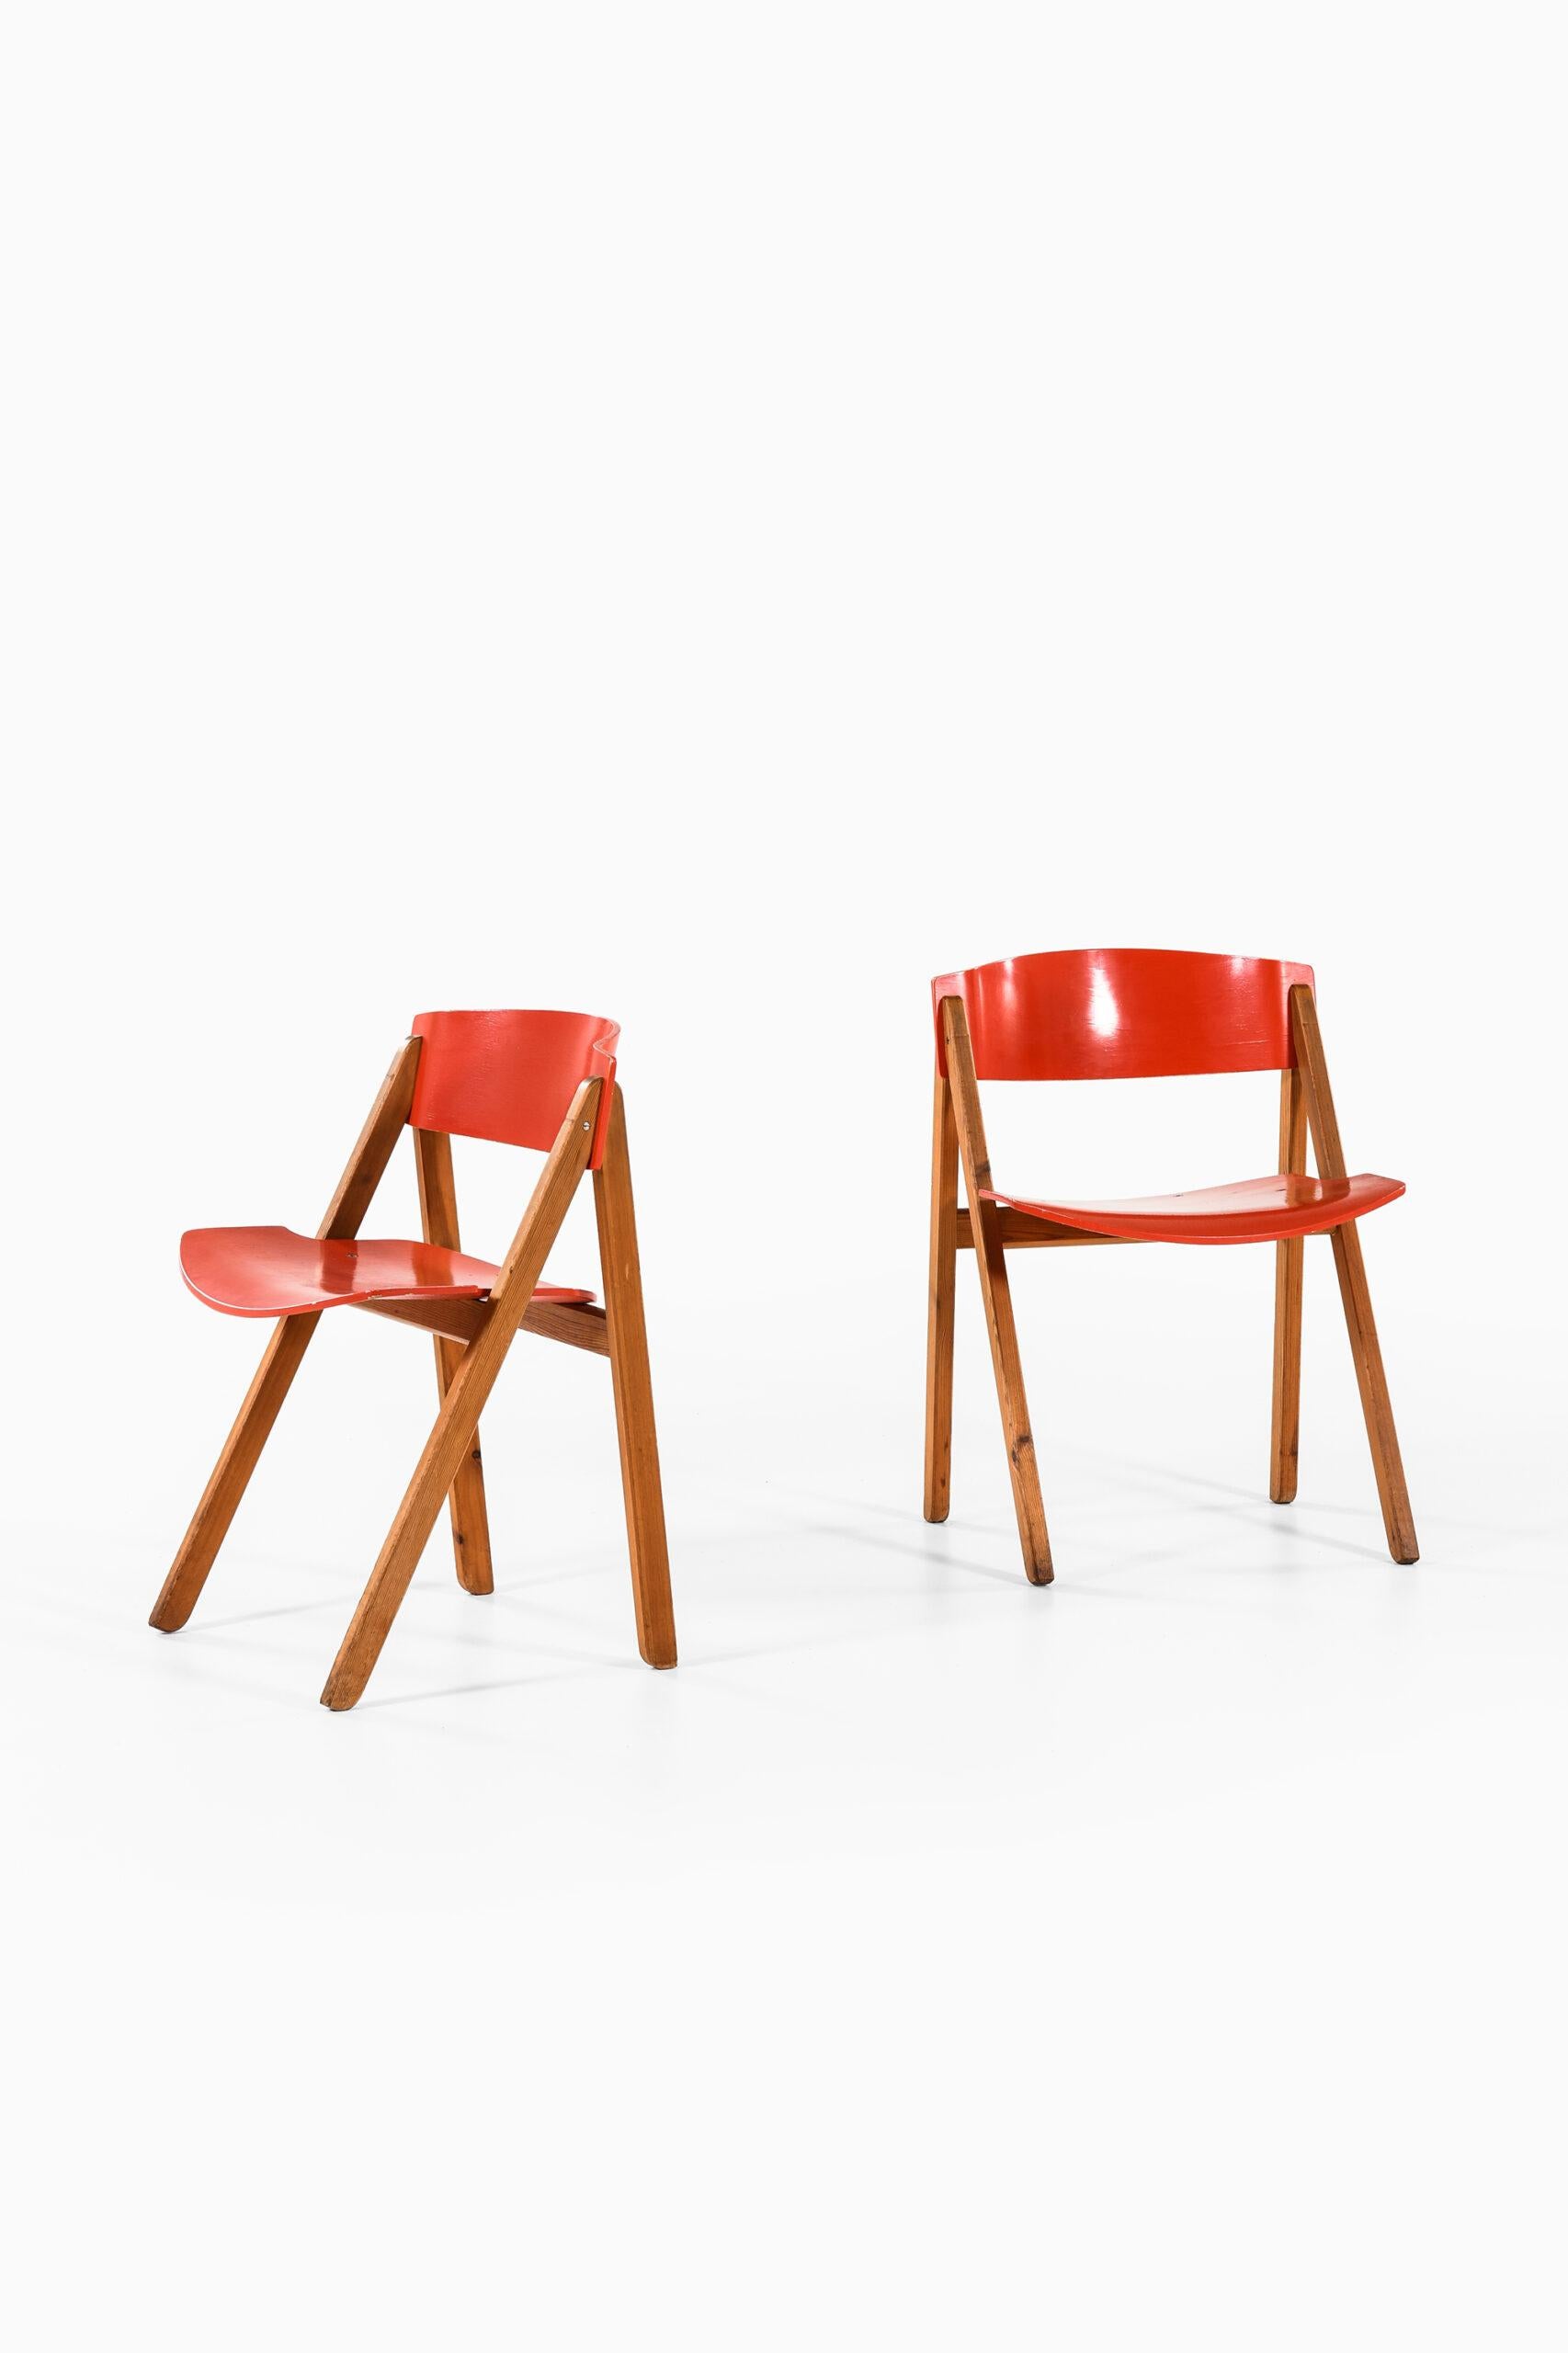 Rare set of 7 dining chairs by designed by Victor Bernt. Produced by Søren Willadsen Møbelfabrik in Denmark.